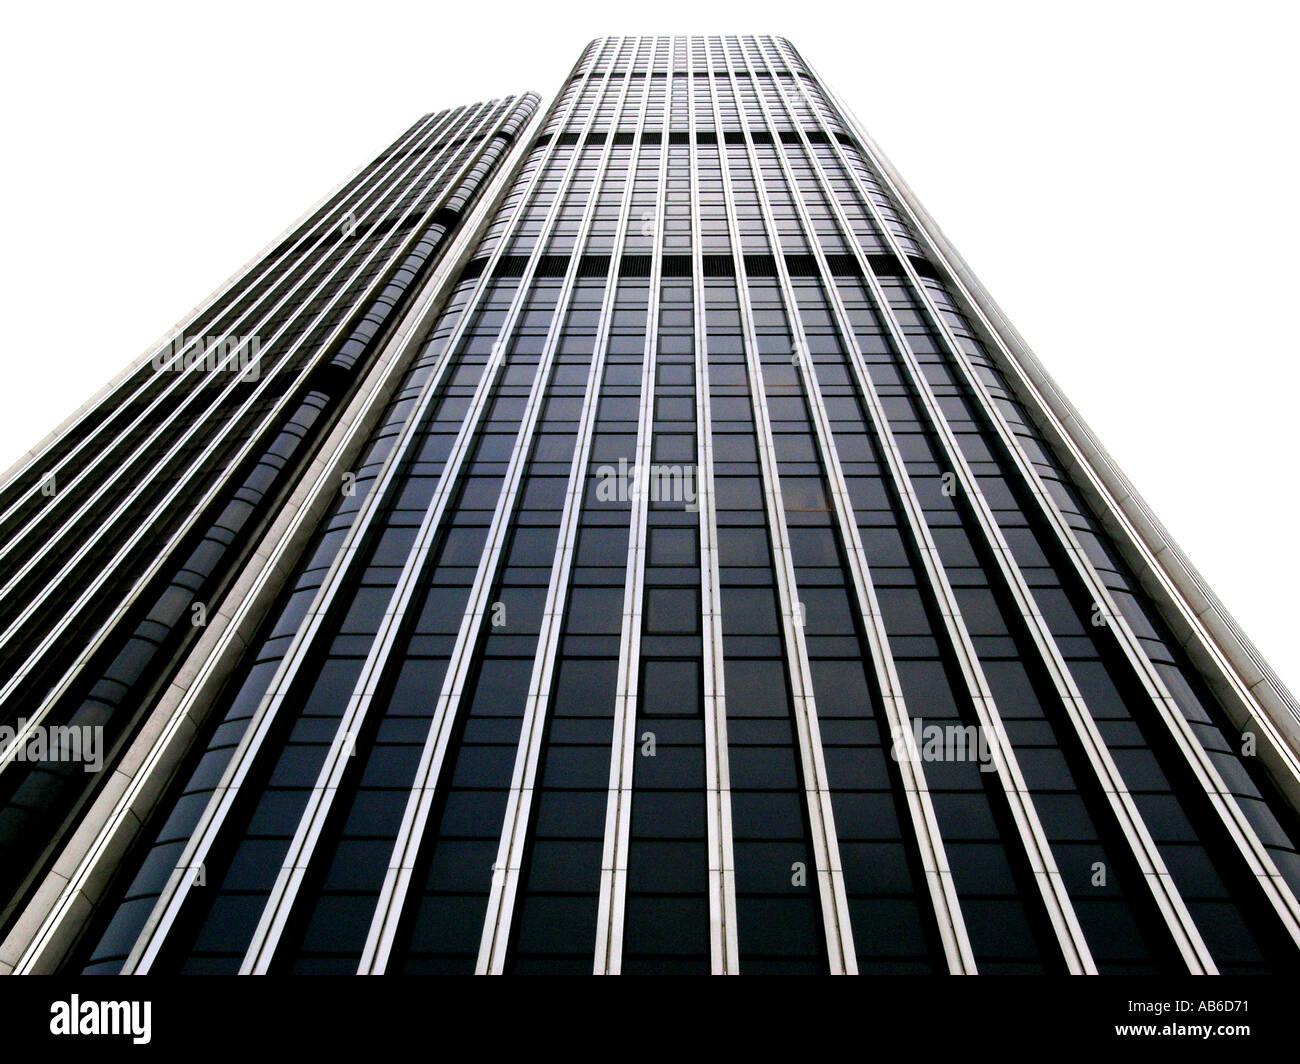 The 600 ft high Natwest Tower 42 International Finance Centre at 25 Old Broad Street London England Britain United Kingdom UK Stock Photo